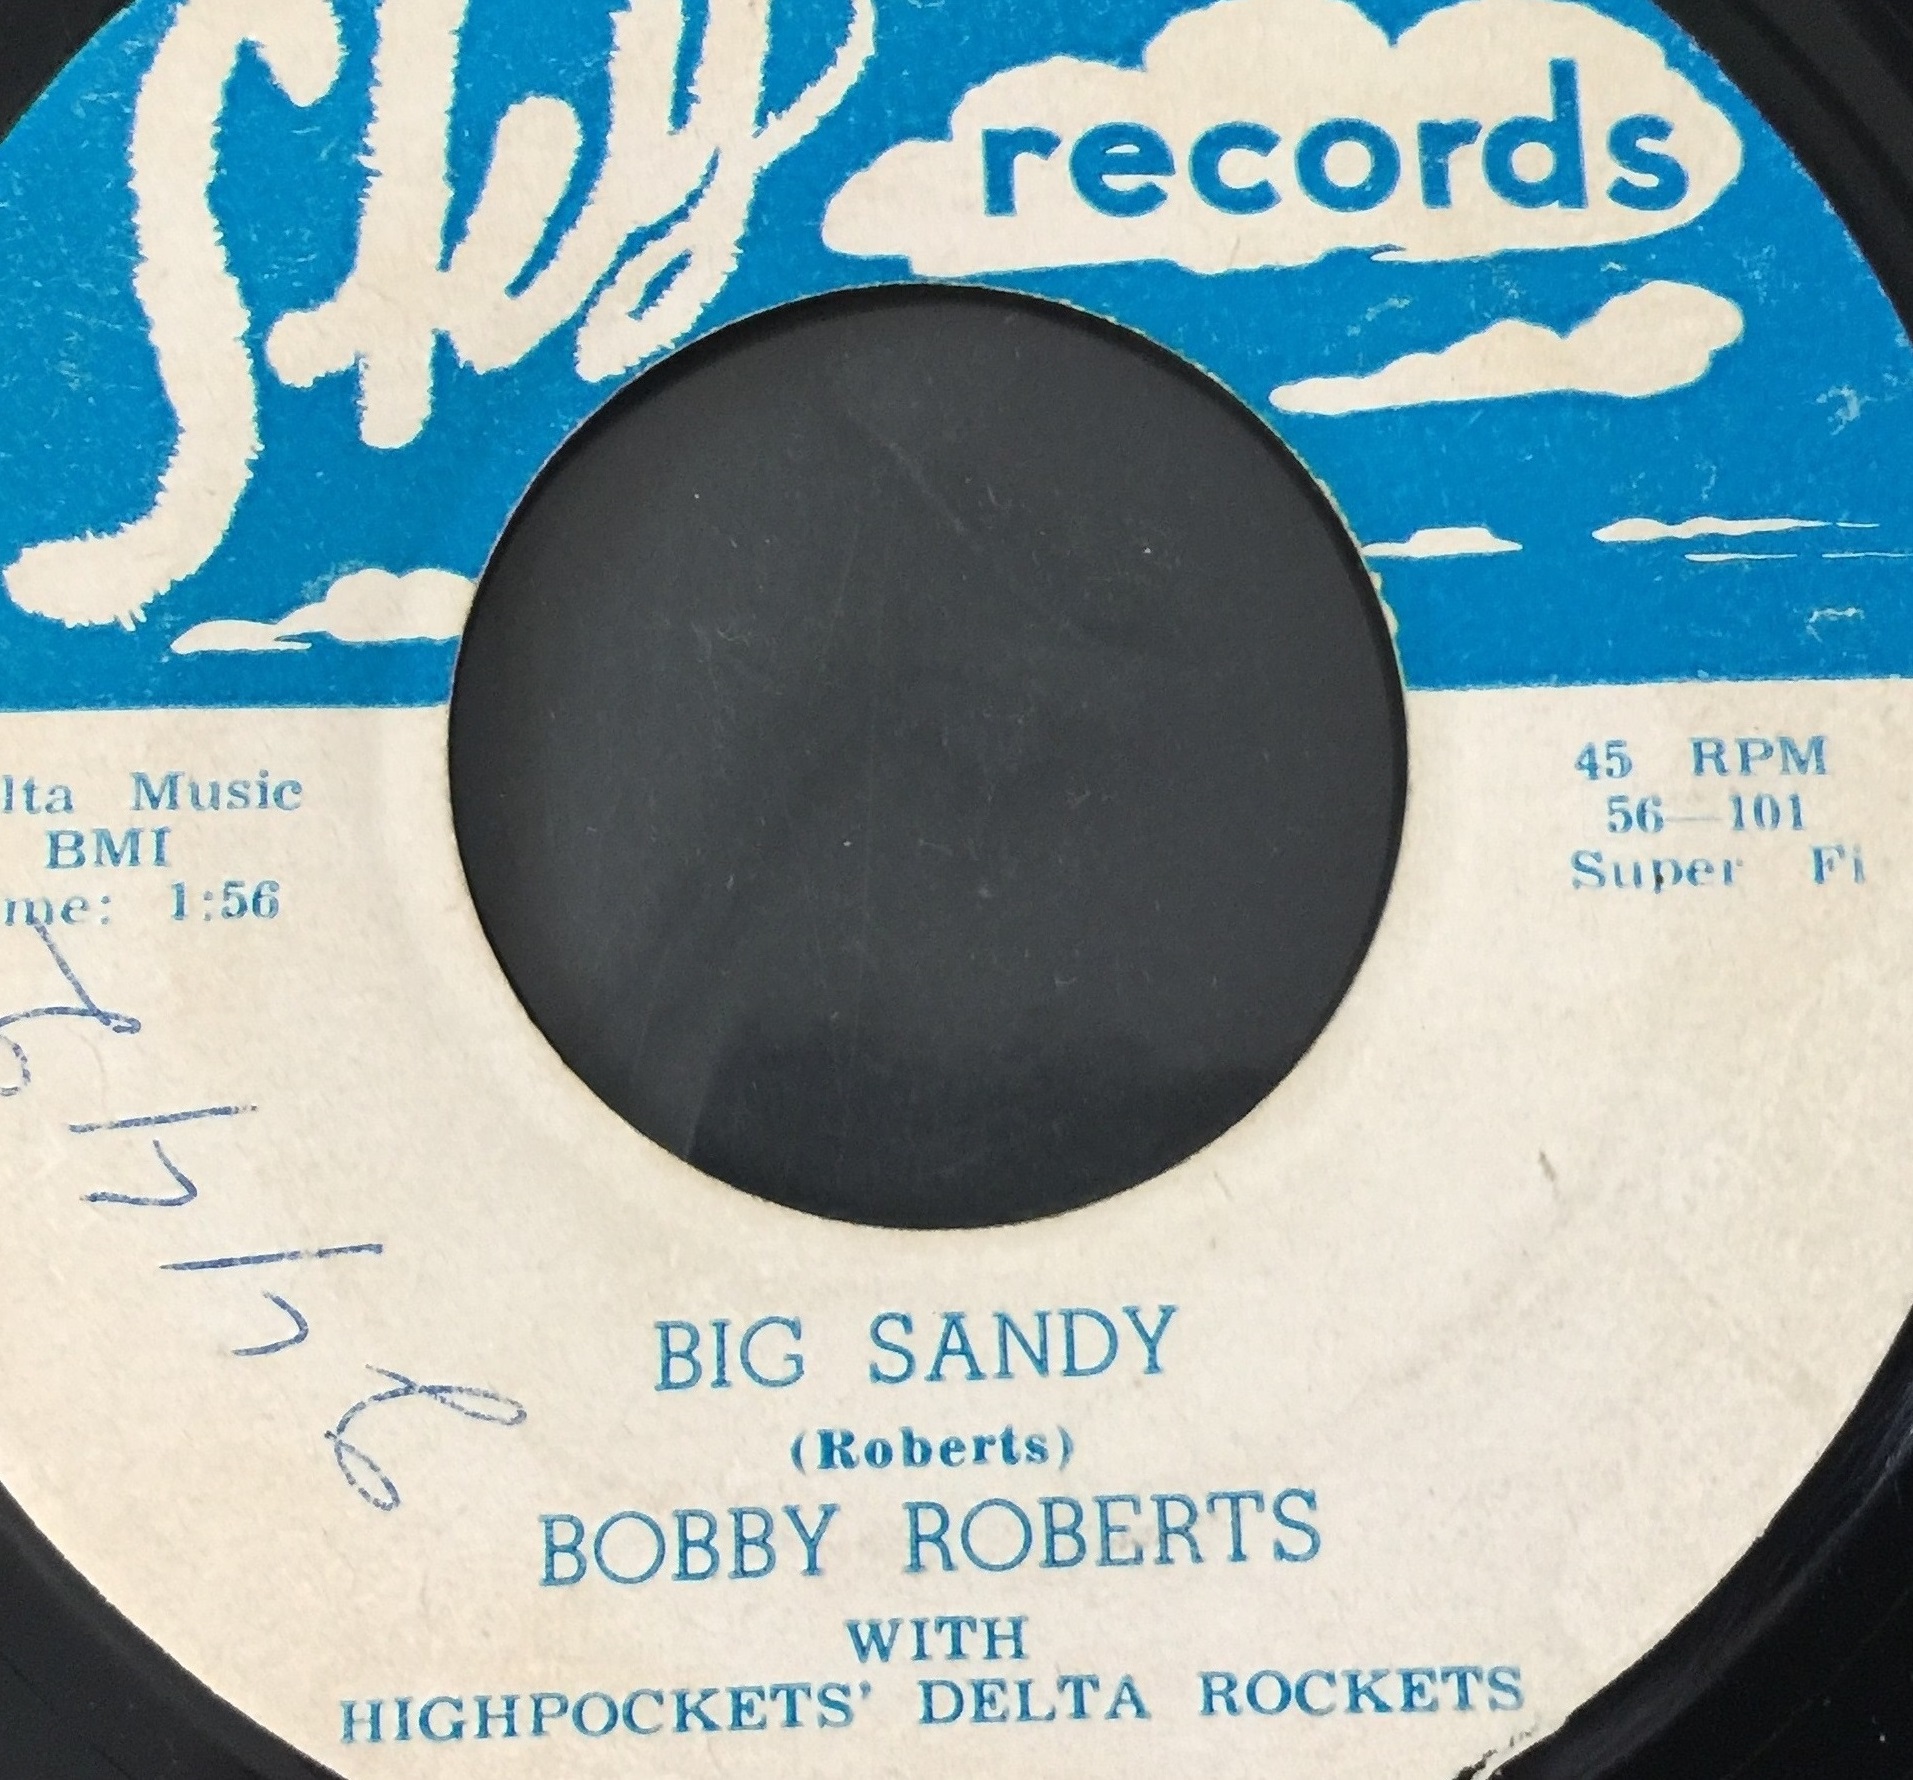 The Bob Solly Collection of Rare Records Part I: US Rockabilly, R&R, R&B, Blues and Soul 45s